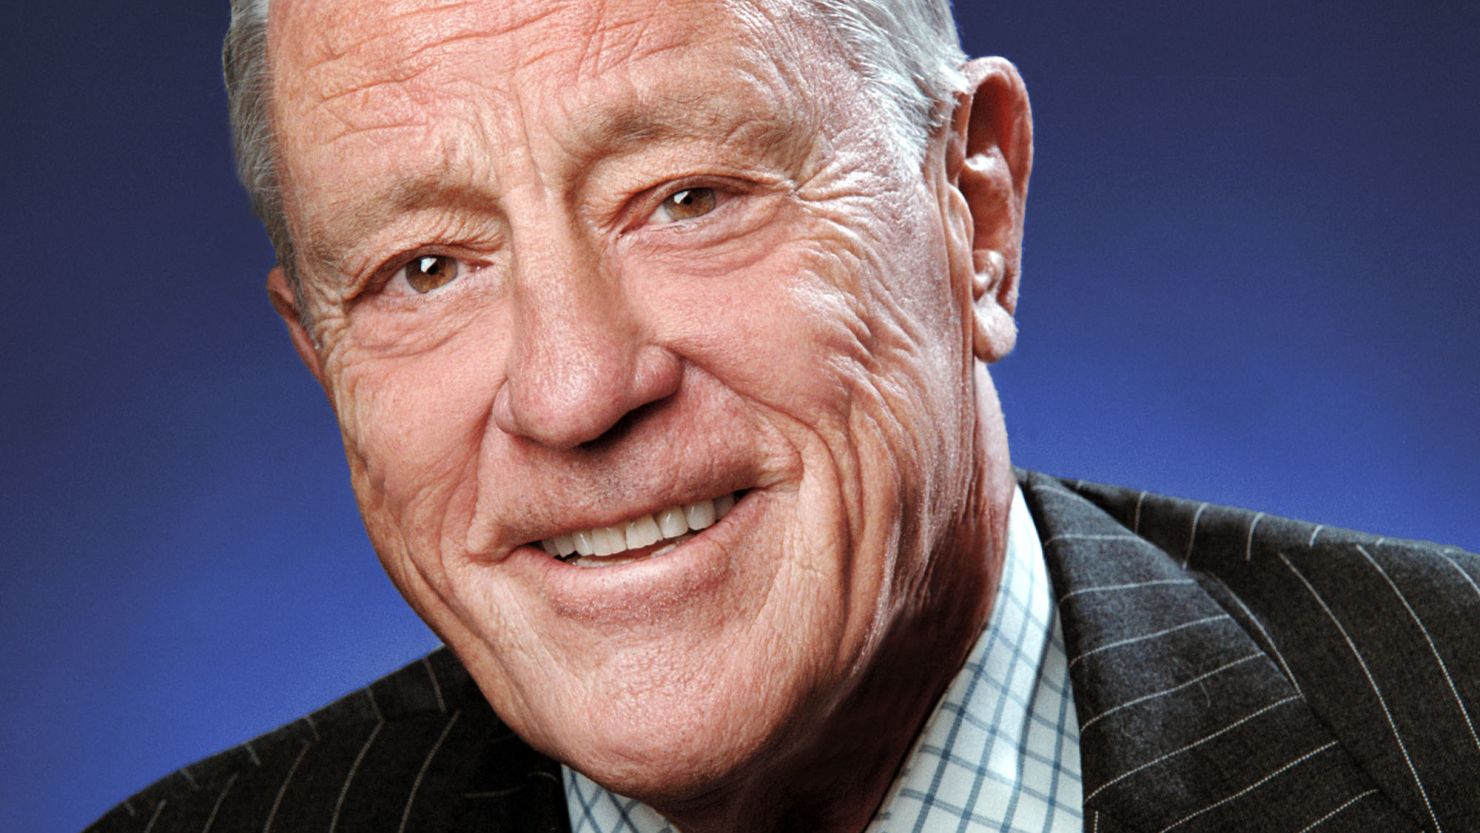 Ben Bradlee was the executive editor of The Washington Post from 1968 to 1991.